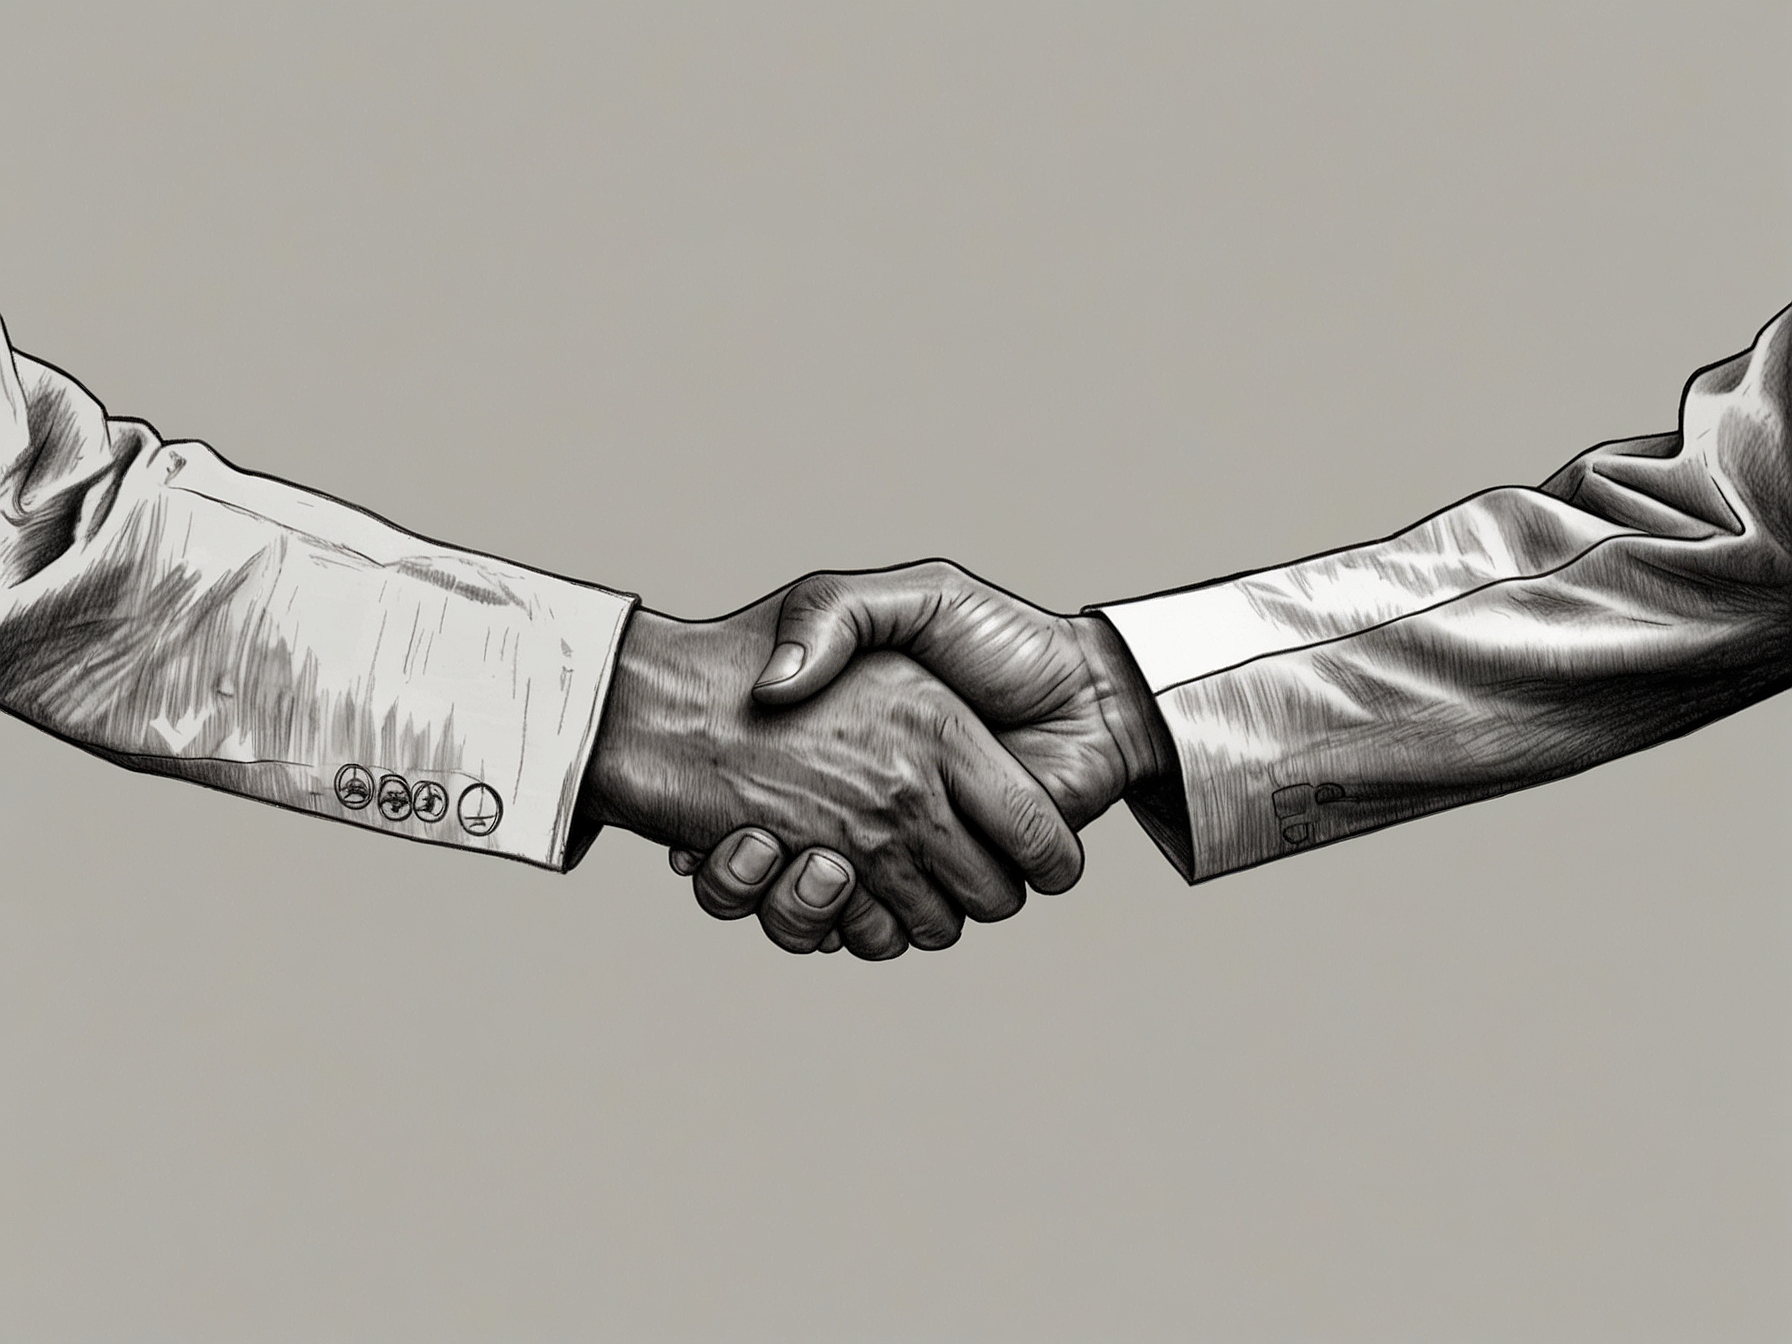 An illustration of Sri Lankan officials shaking hands with representatives from China and France, symbolizing the successful negotiation of the debt restructuring deal.